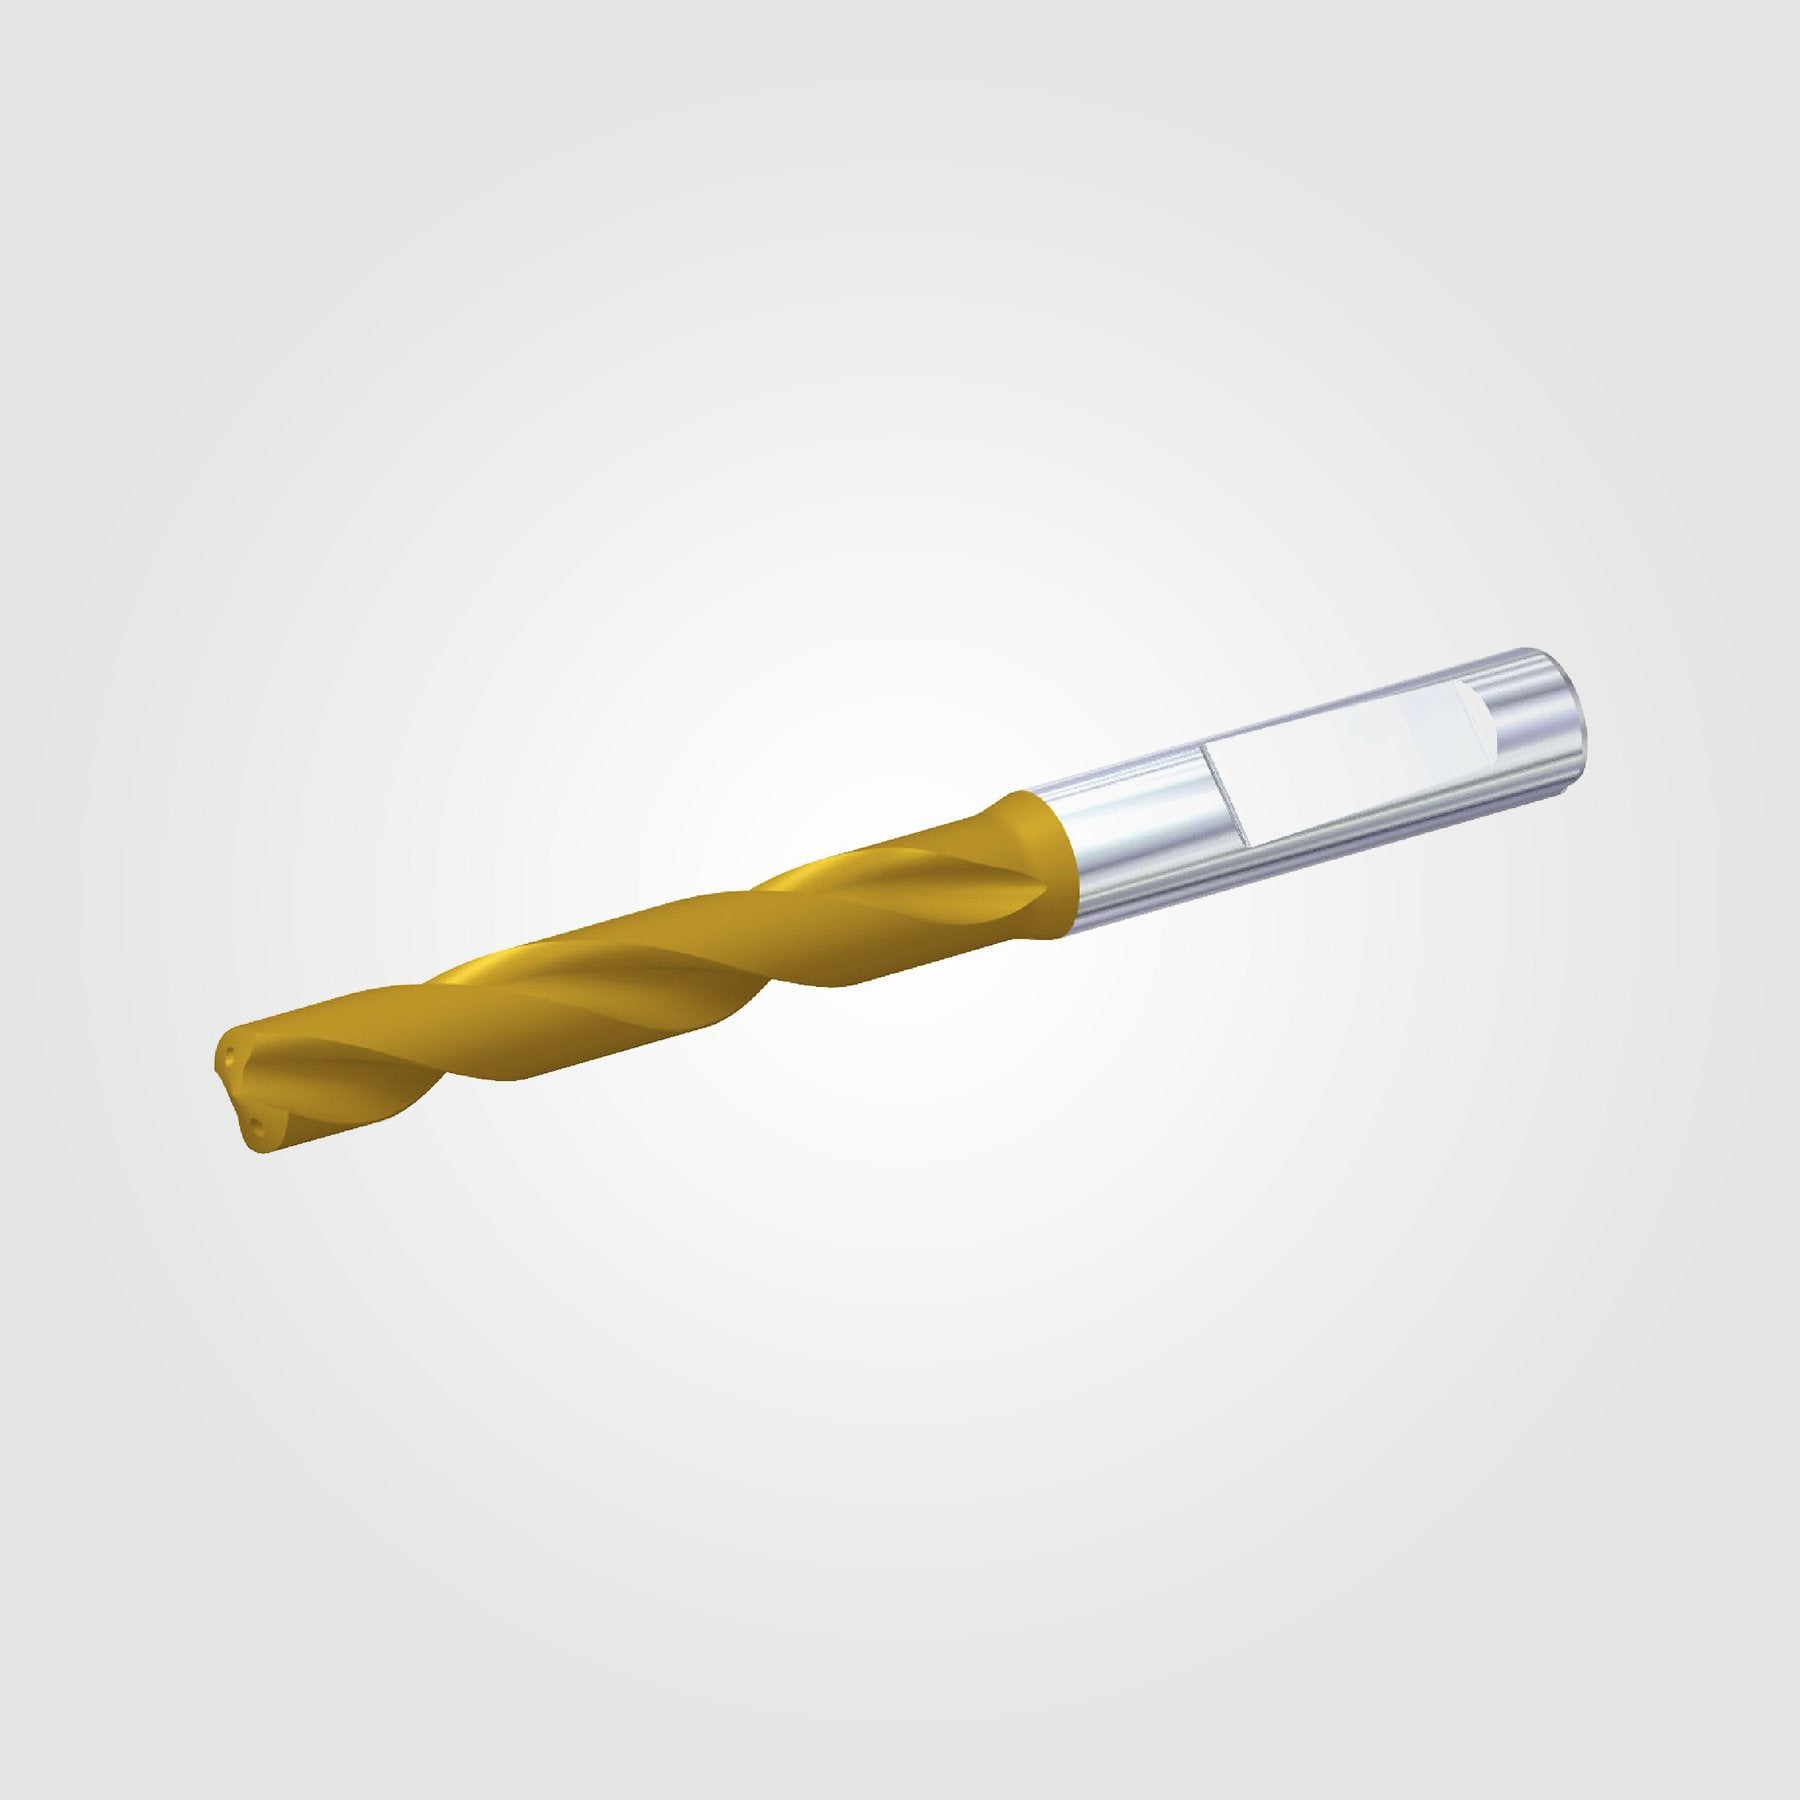 GOdrill (THROUGH COOLANT) | 3.2mm / .1260" / 3xD | SOLID CARBIDE DRILL | 4148841